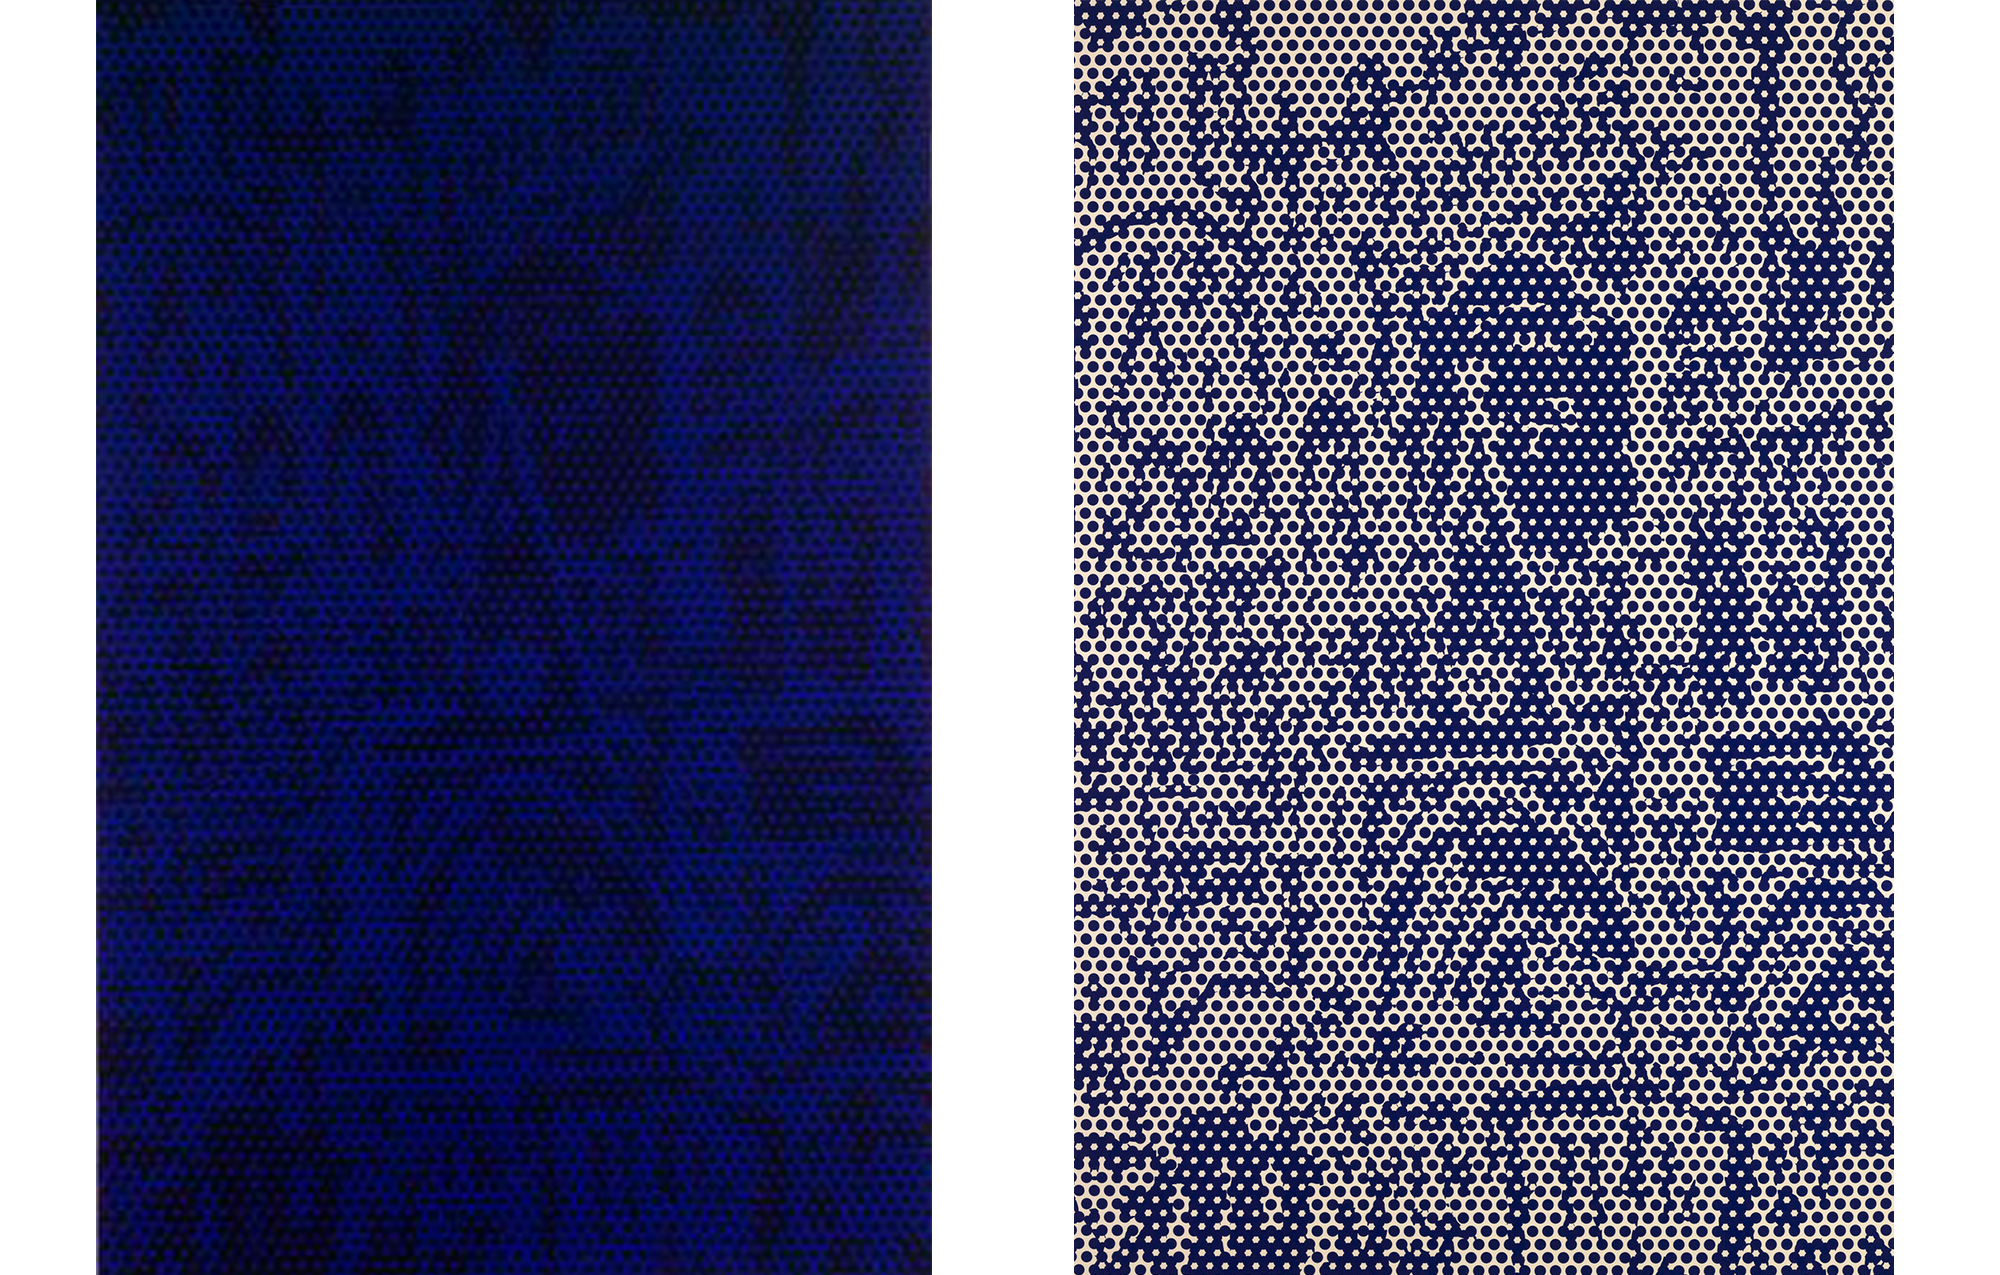 left: pixelated image of the Rouen Cathedral in black against dark blue background. right: pixelated image of the Rouen Cathedral in gray against navy background.